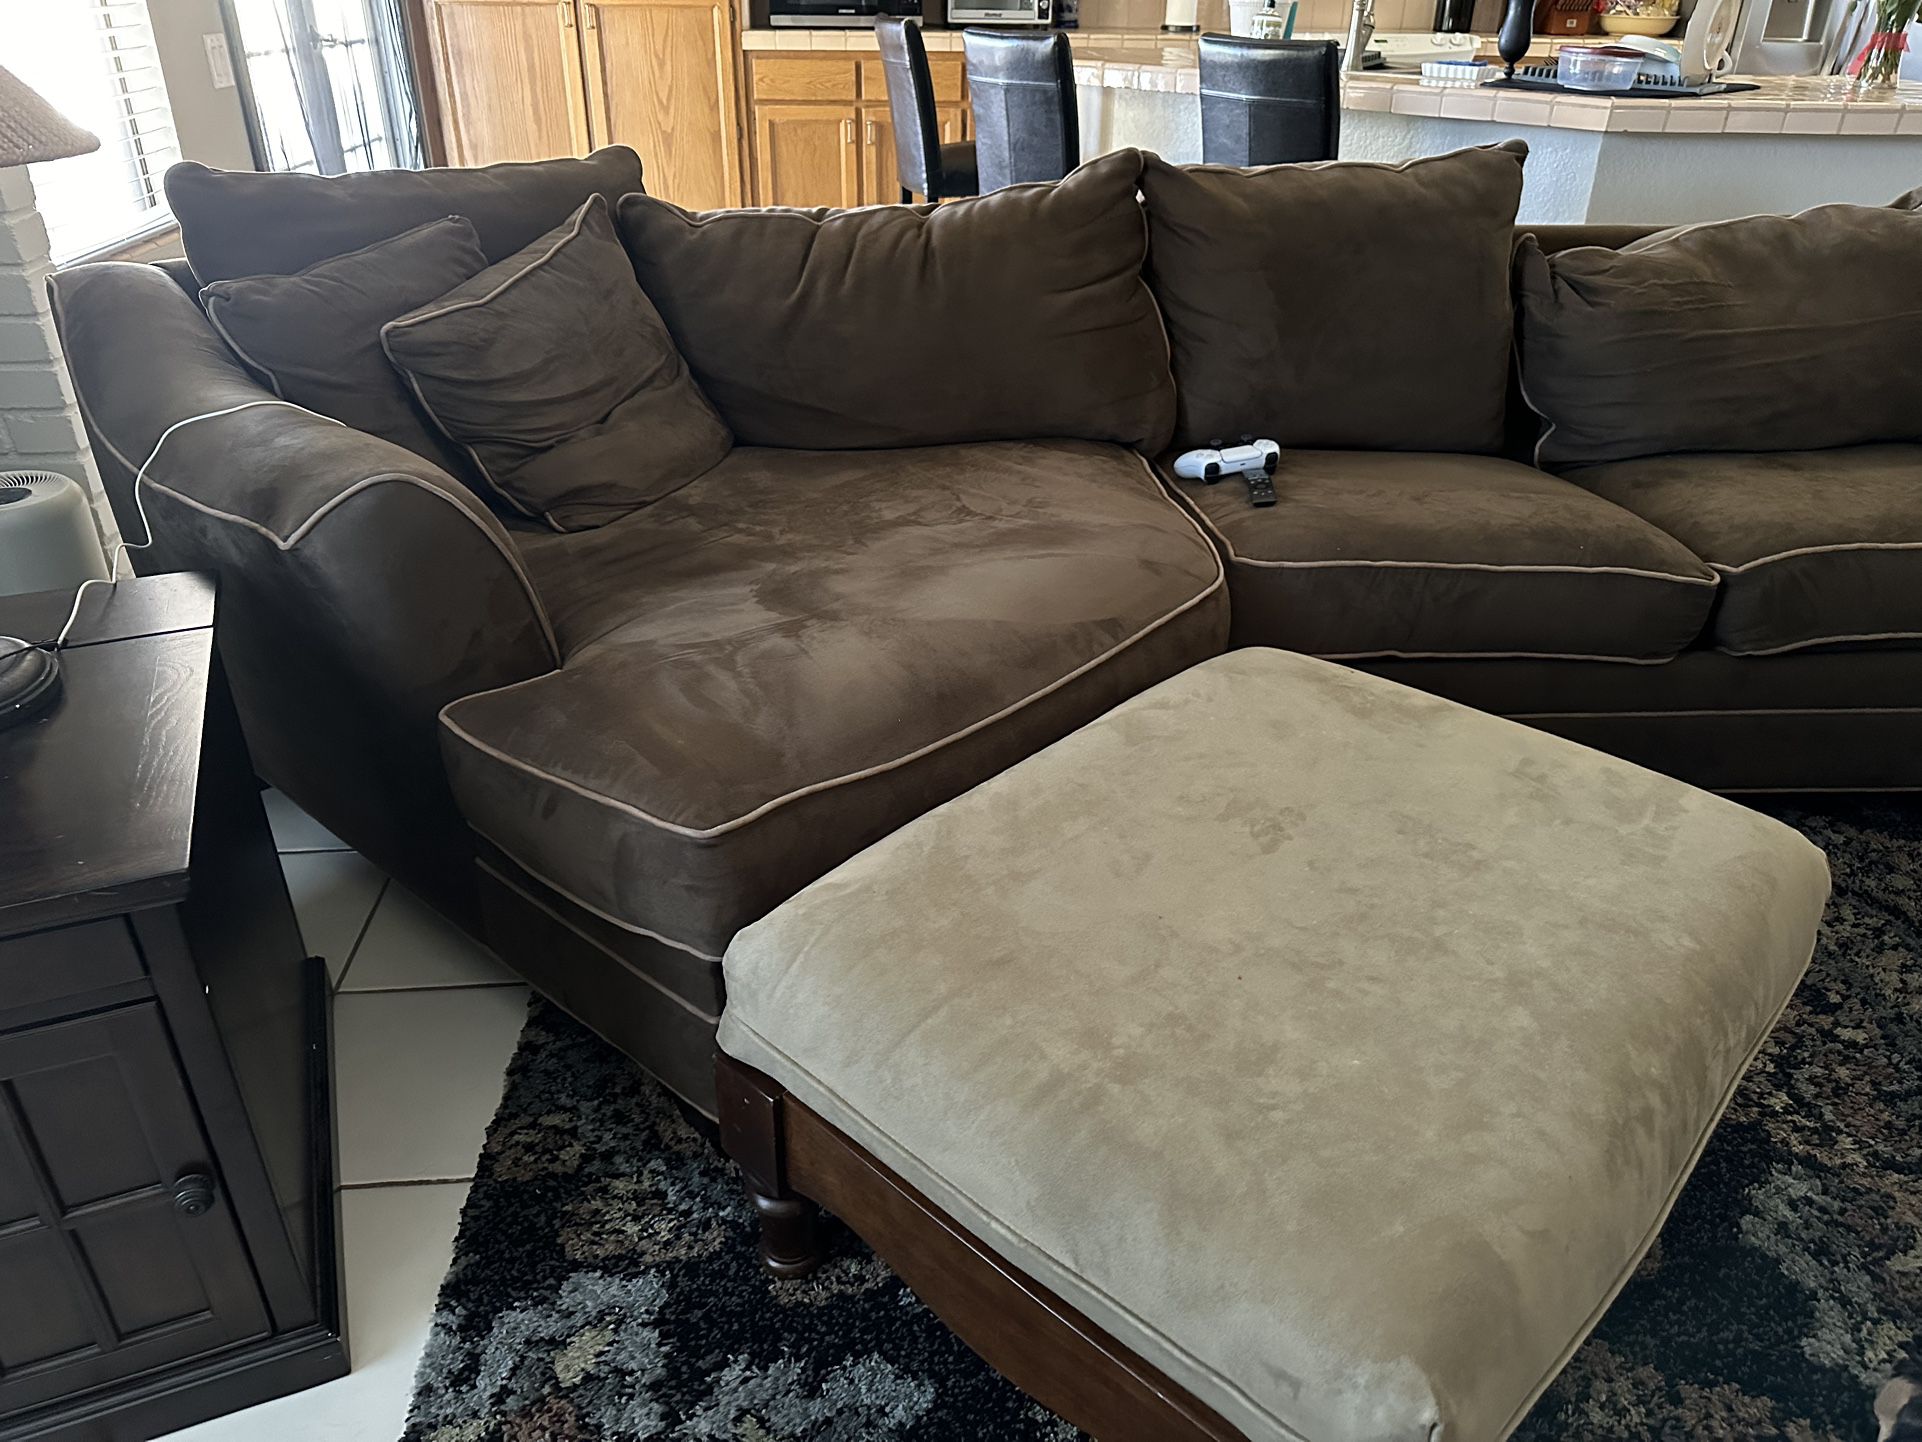 Brown suede couches w/pull out bed